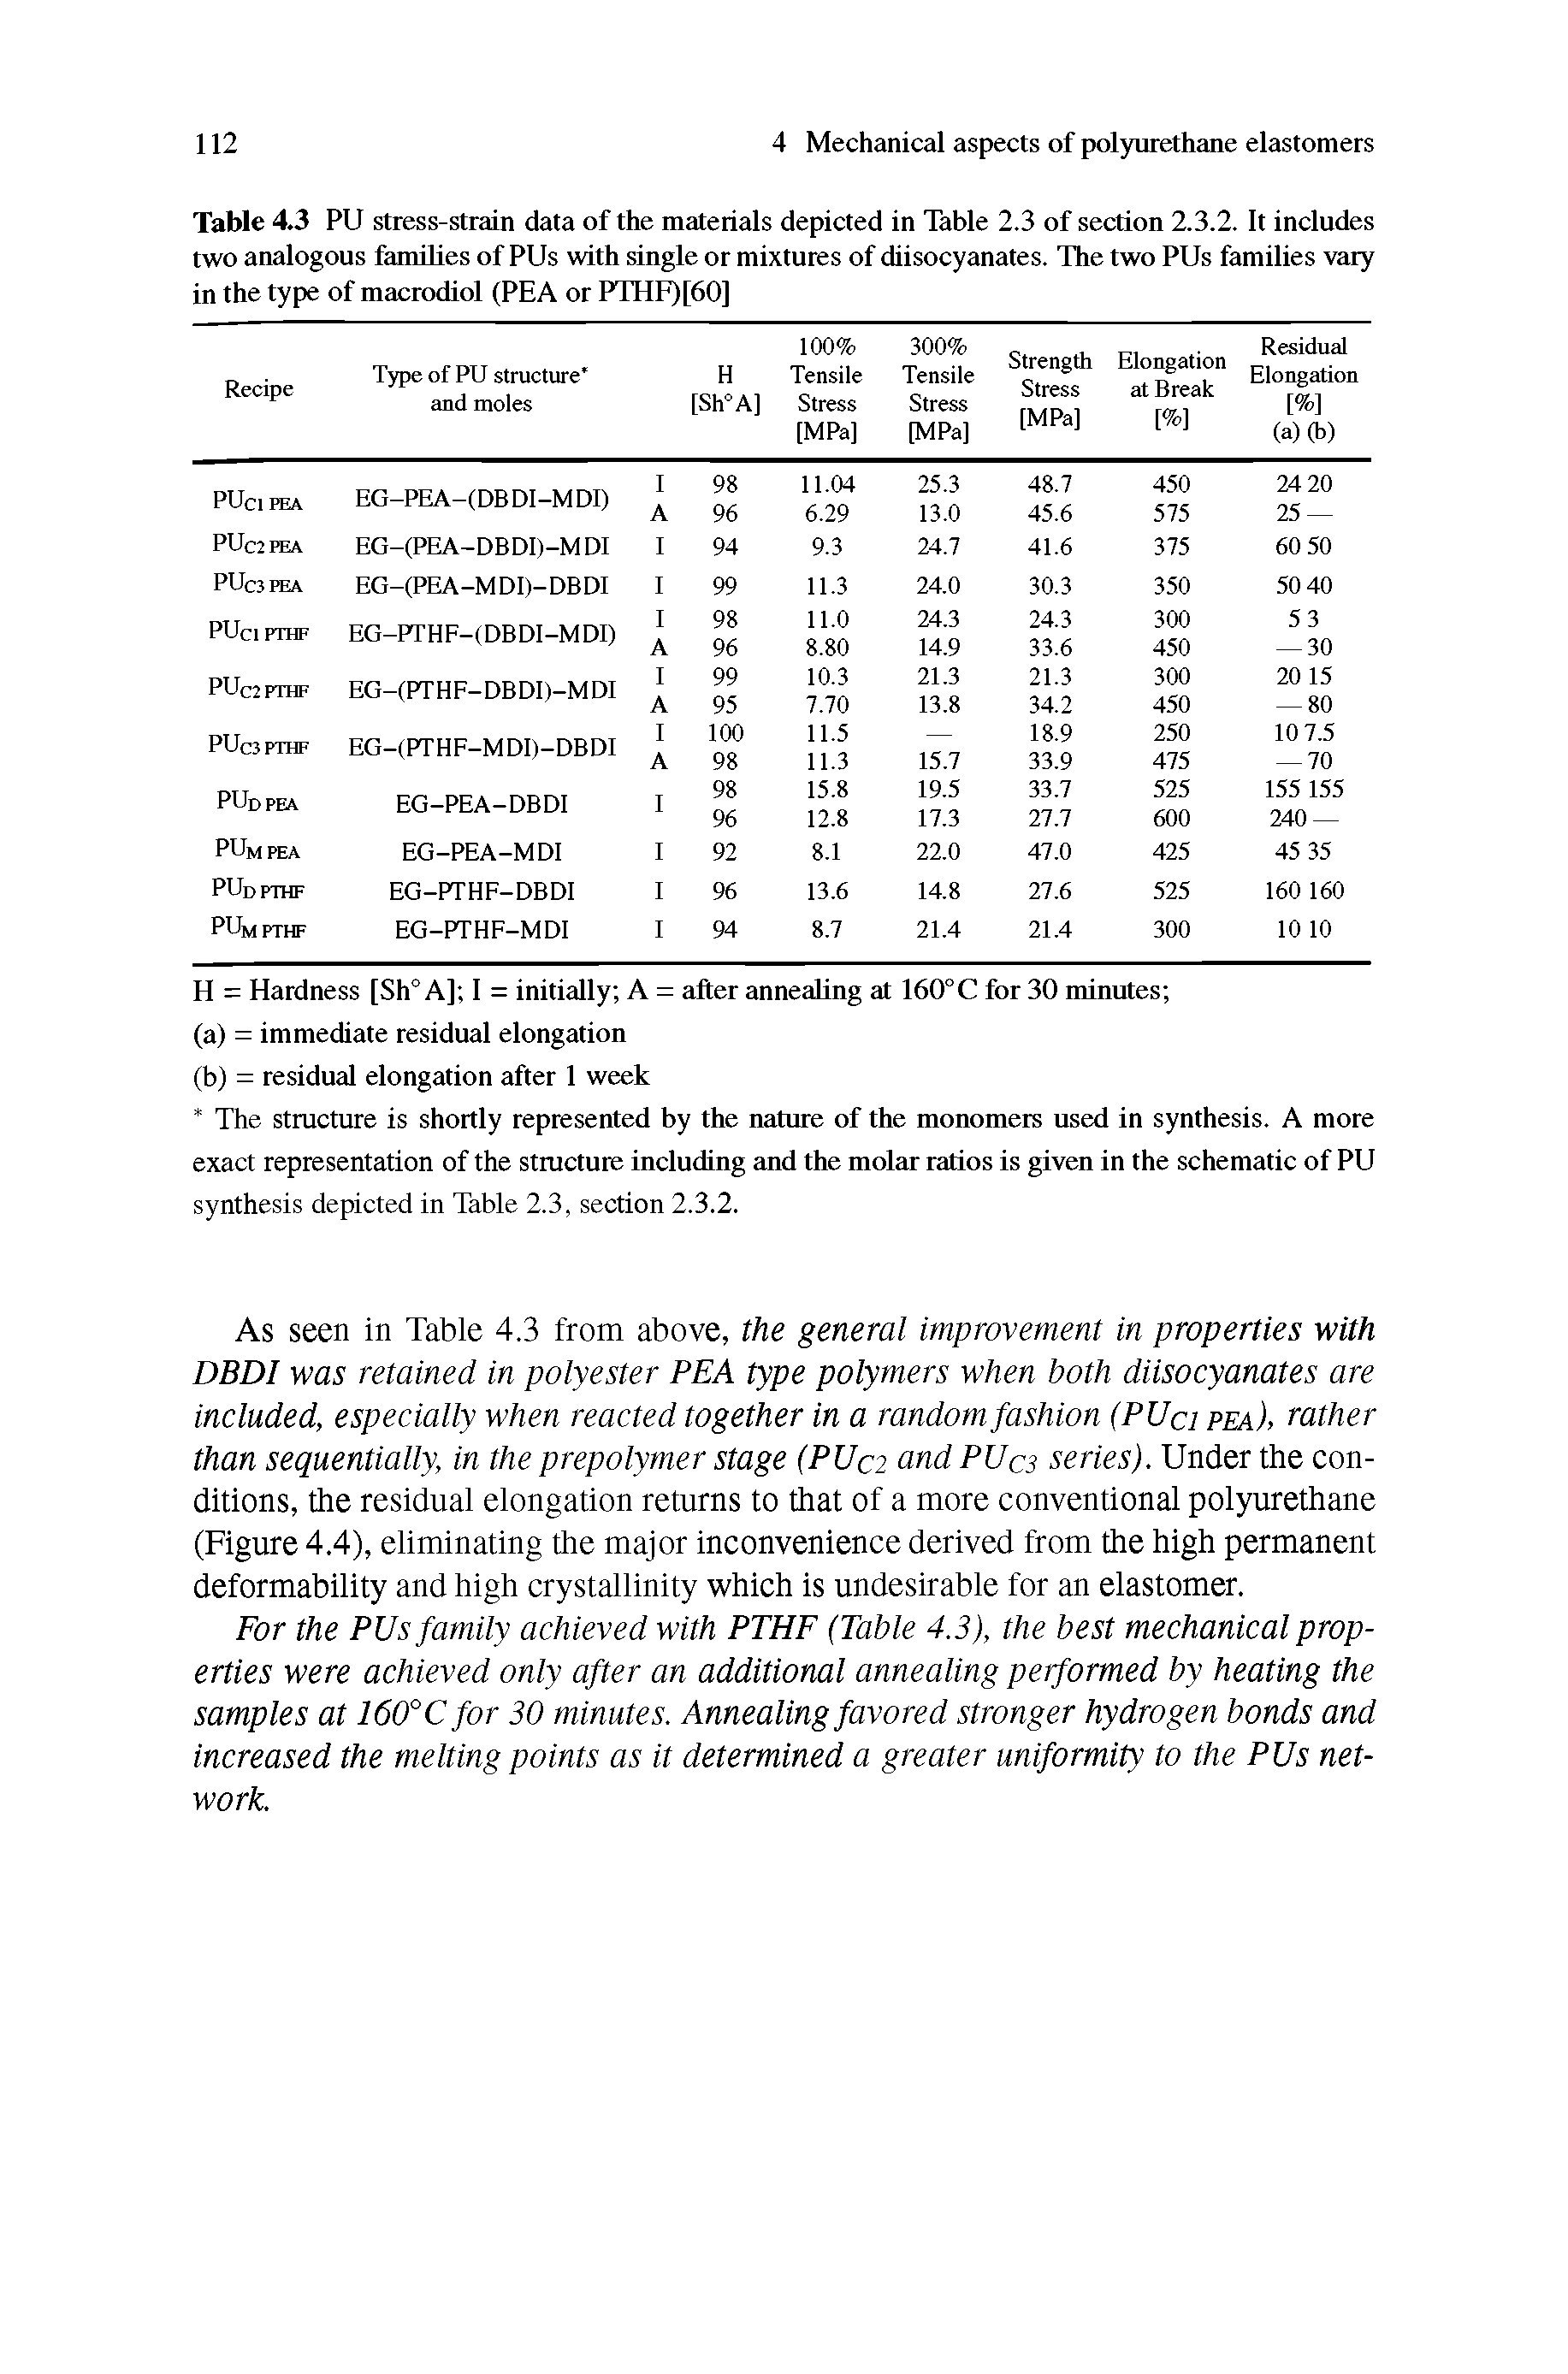 Table 4.3 PU stress-strain data of the materials depicted in Table 2.3 of section 2.3.2. It includes two analogous families of PUs with single or mixtures of diisocyanates. The two PUs families vary in the type of macrodiol (PEA or PTHF)[60]...